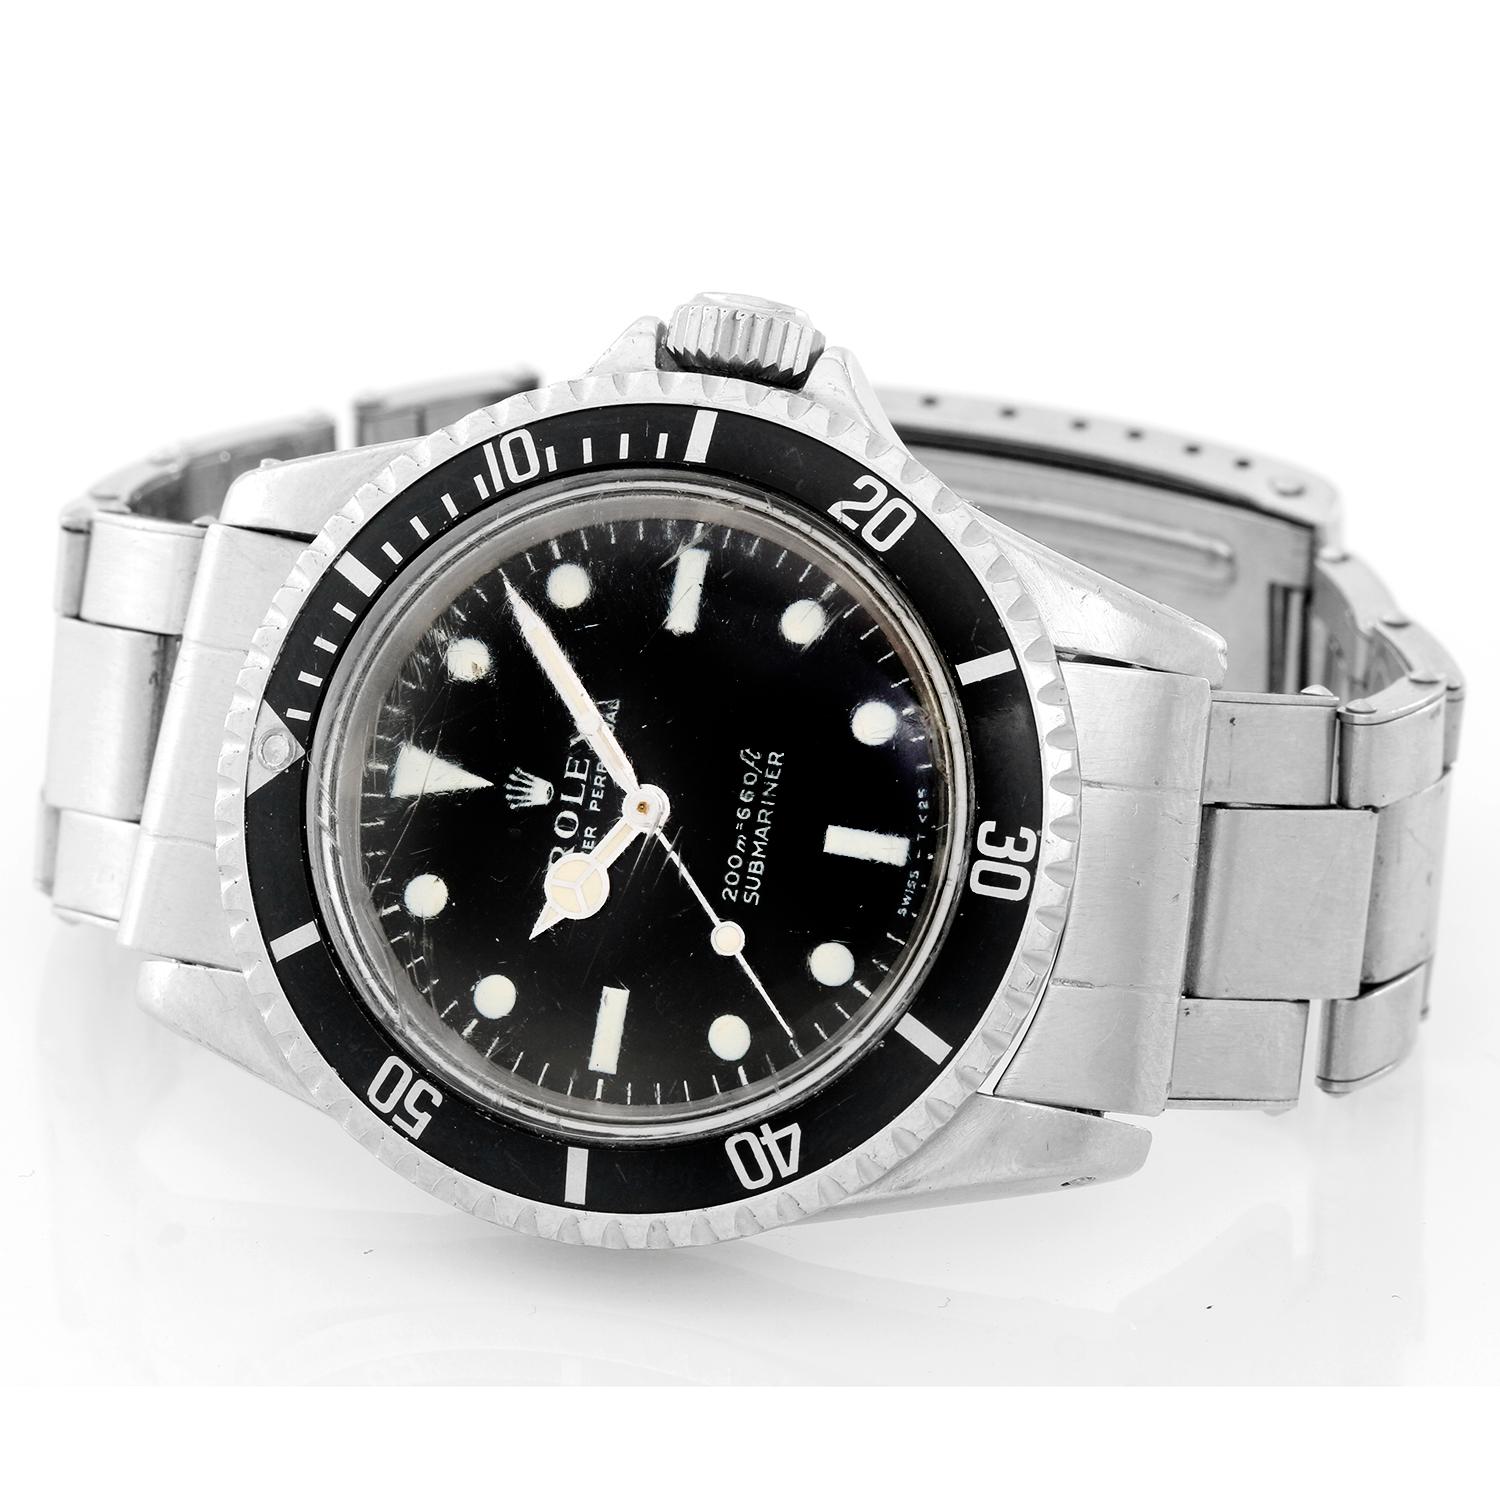 Rolex Submariner Men's Vintage Stainless Steel Watch 5513 - Automatic winding. Stainless steel case (40mm diameter). Black dial with luminous-style markers. Stainless steel Oyster bracelet. Pre-owned, Late-1960's model, ser 182****.